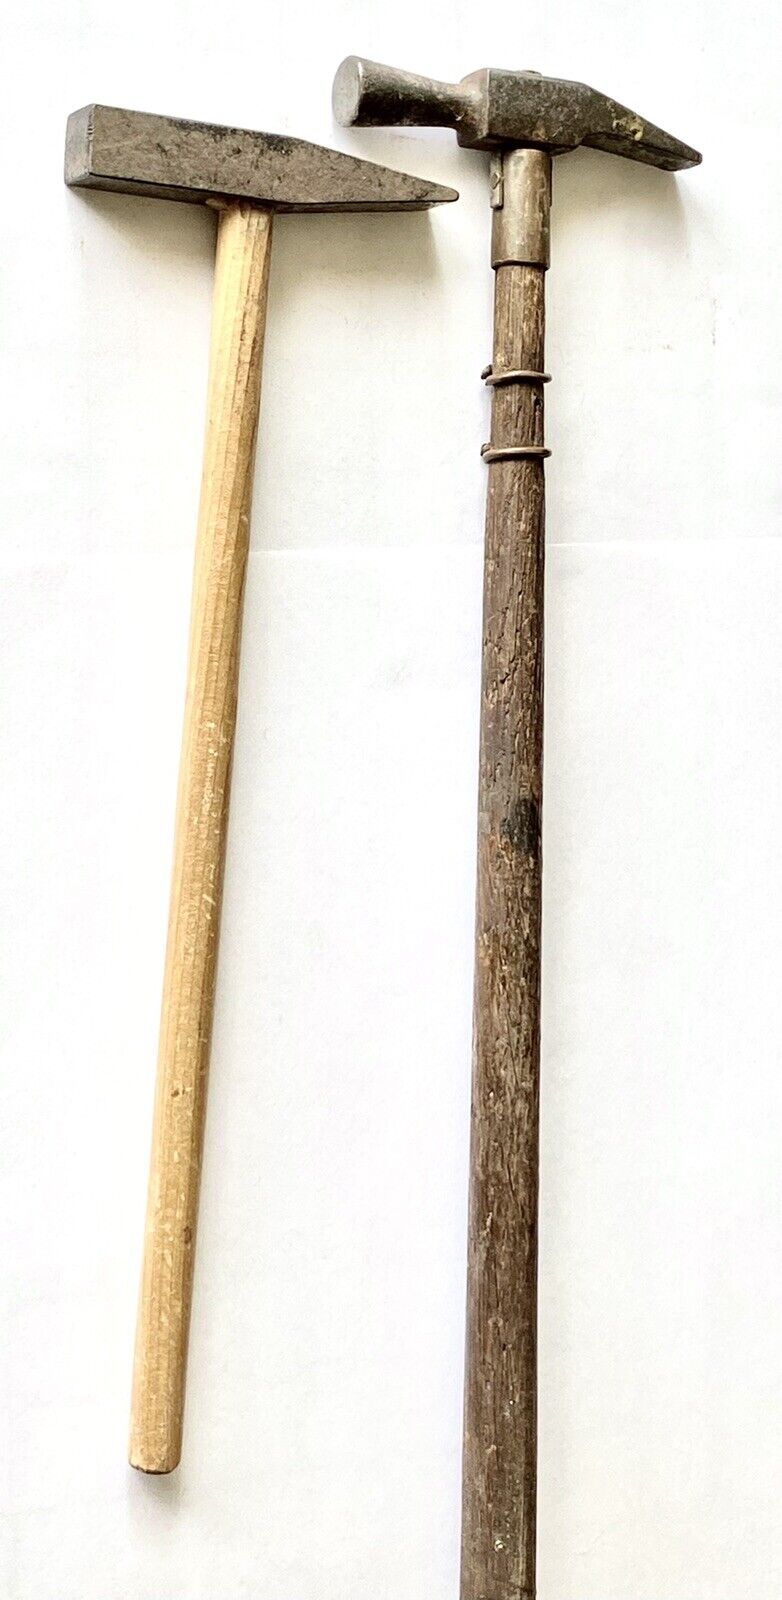 TWO VINTAGE SMALL JEWELERS OLD HAMMERS TOOL PEEN SMALL JOBS SILVERSMITH